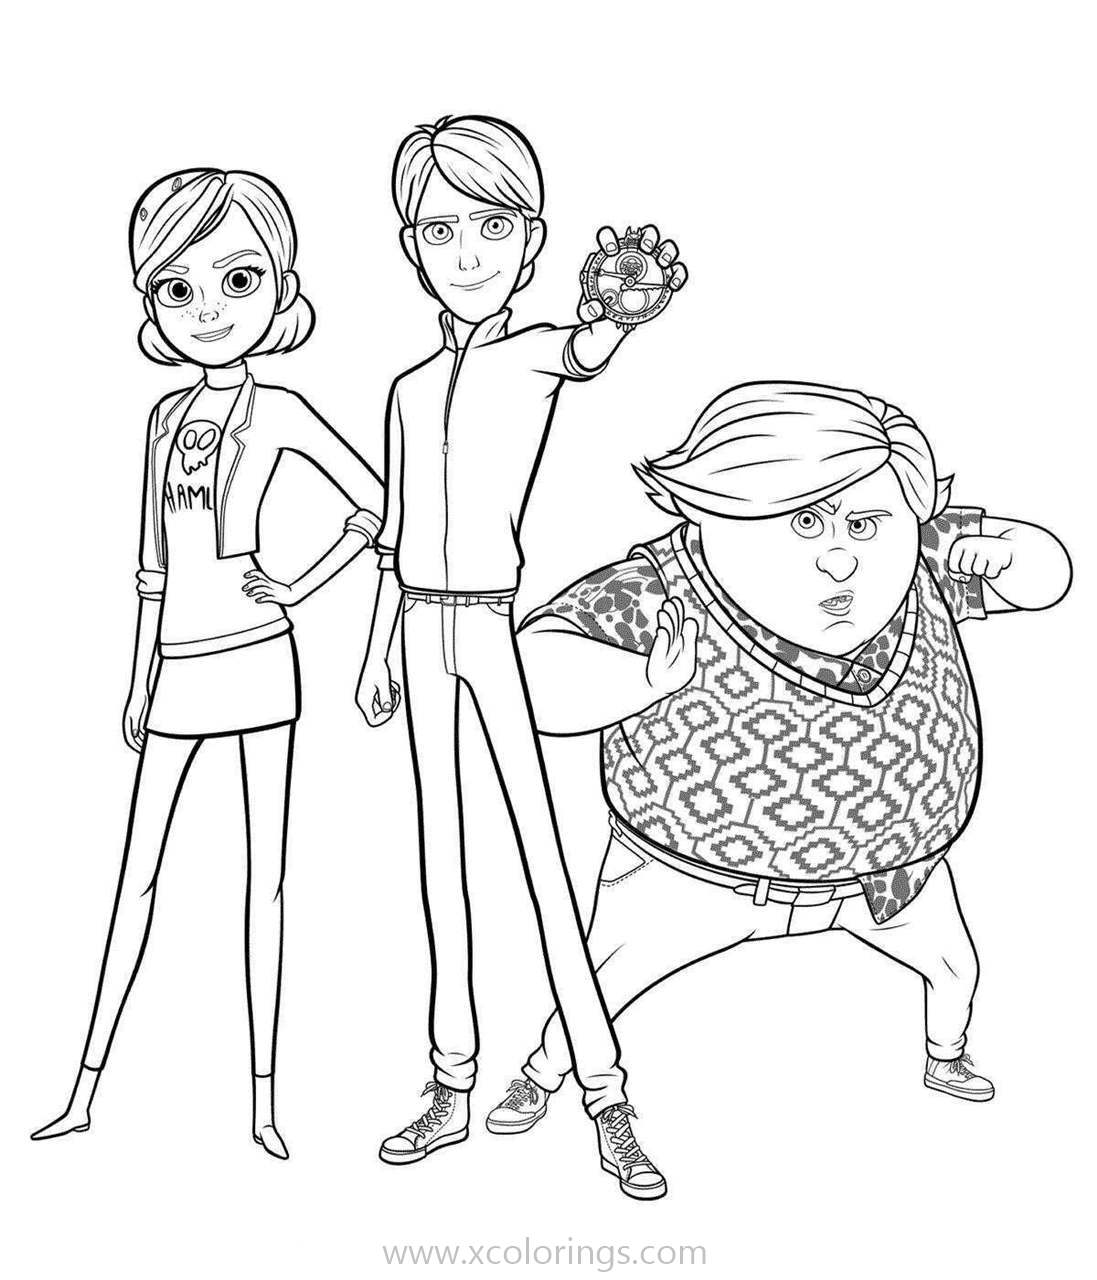 Free Characters from Trollhunters Coloring Pages printable